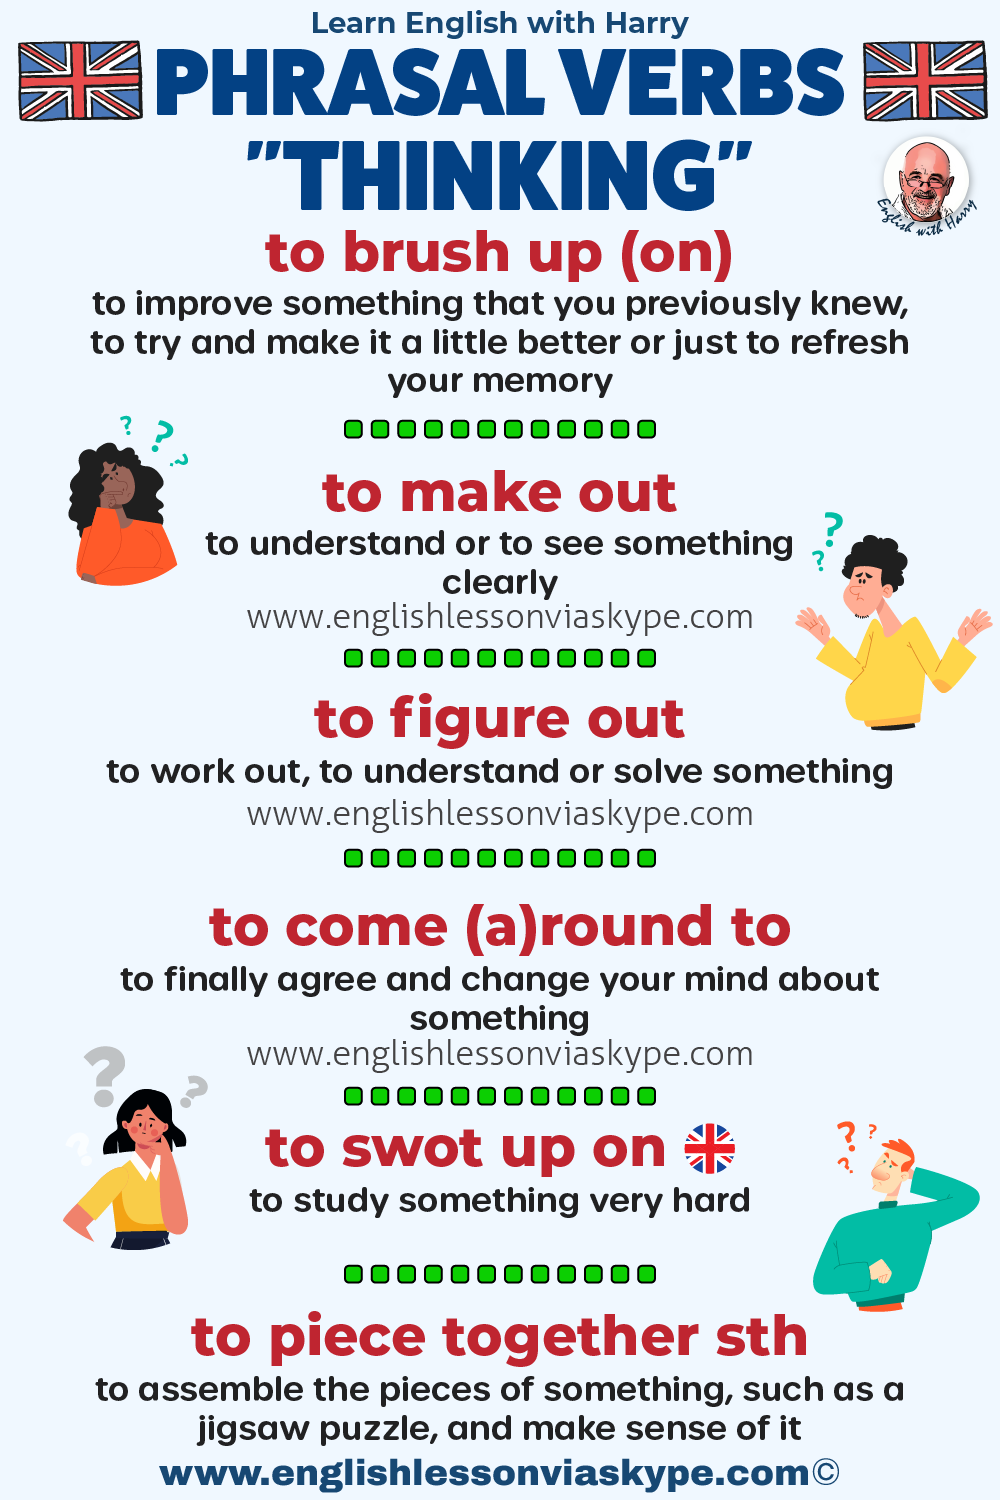 phrasal-verbs-about-thinking-and-learning-study-advanced-english